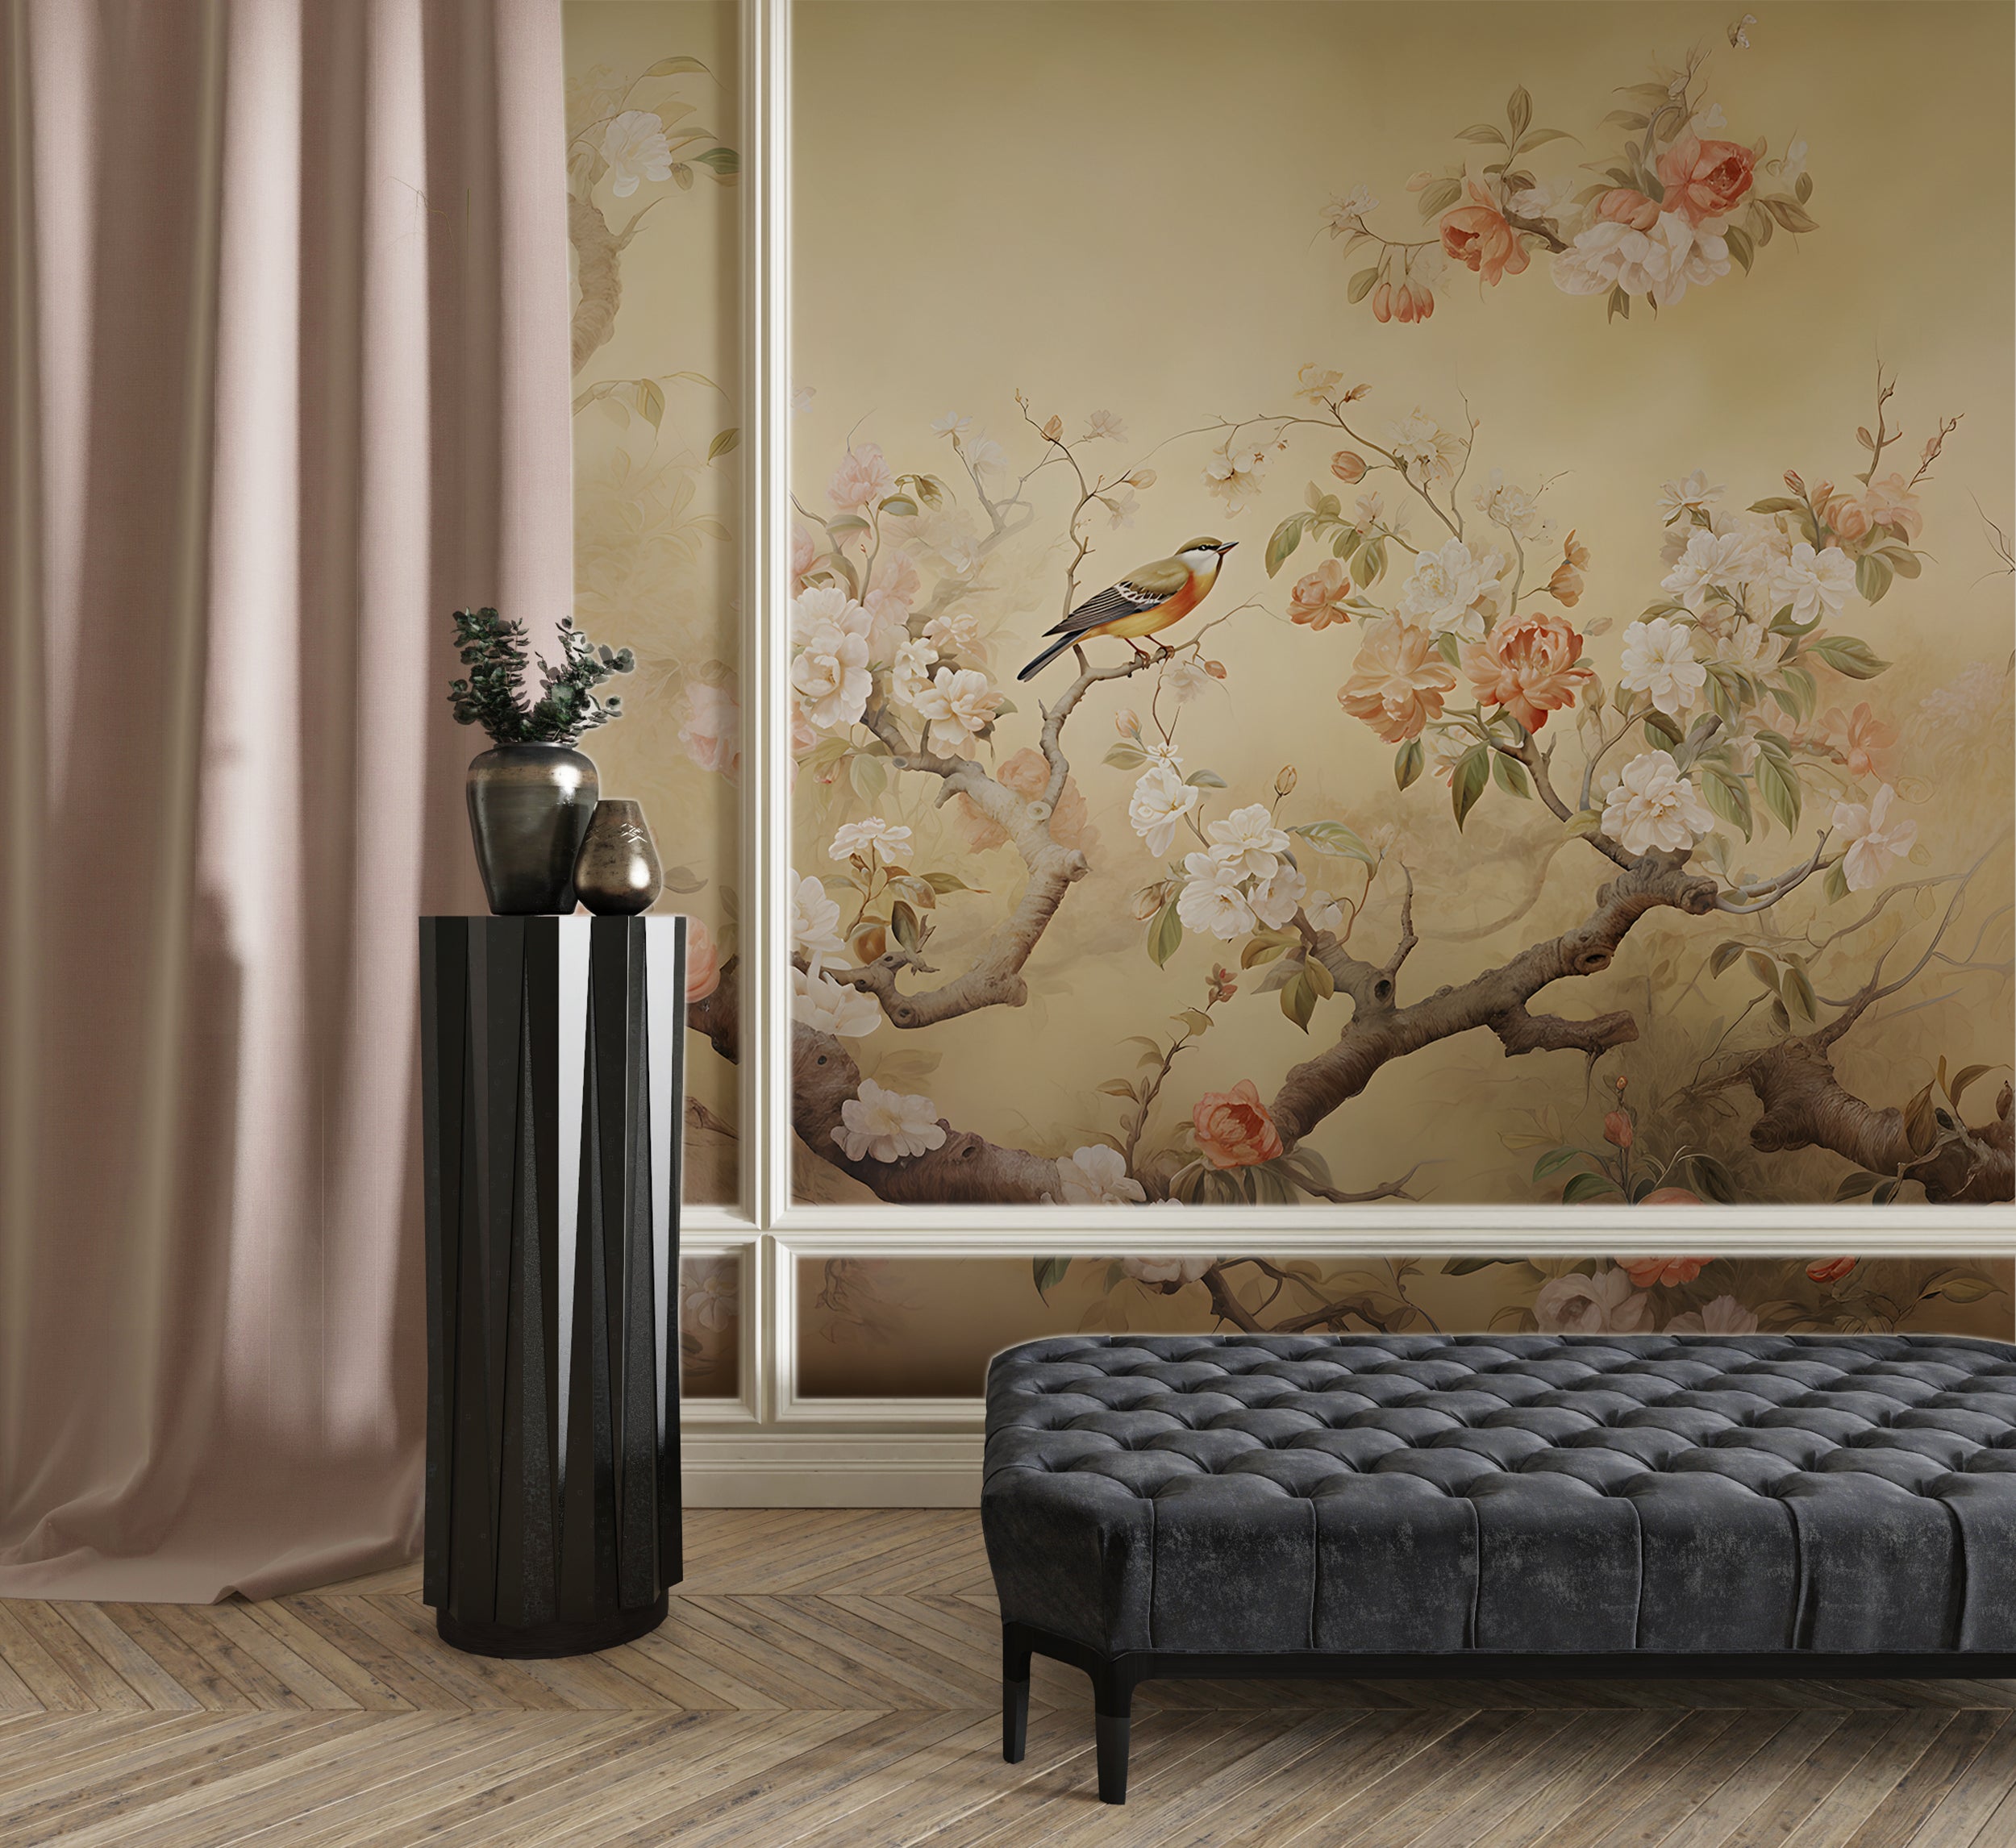 Chinoiserie Artistry in Wallpaper